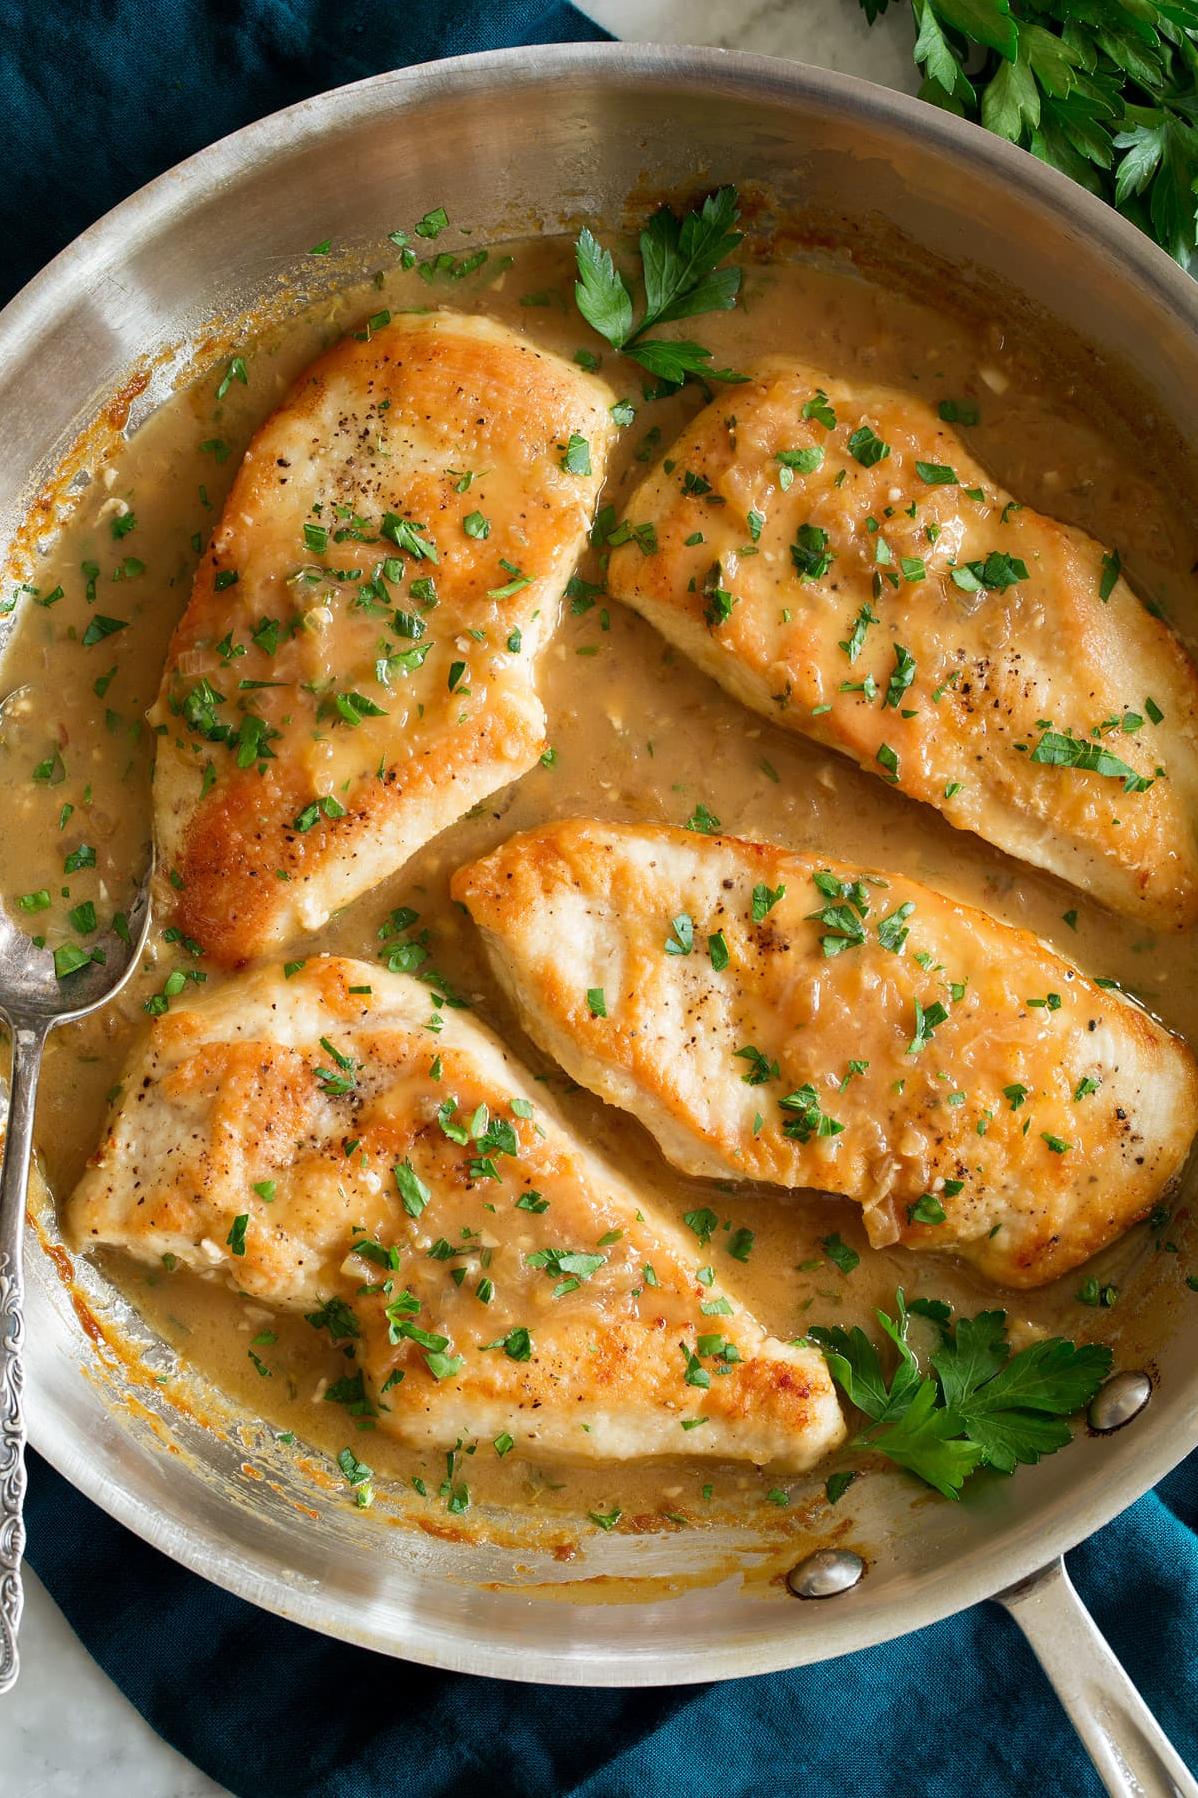  Tender and juicy roasted chicken in white wine sauce.